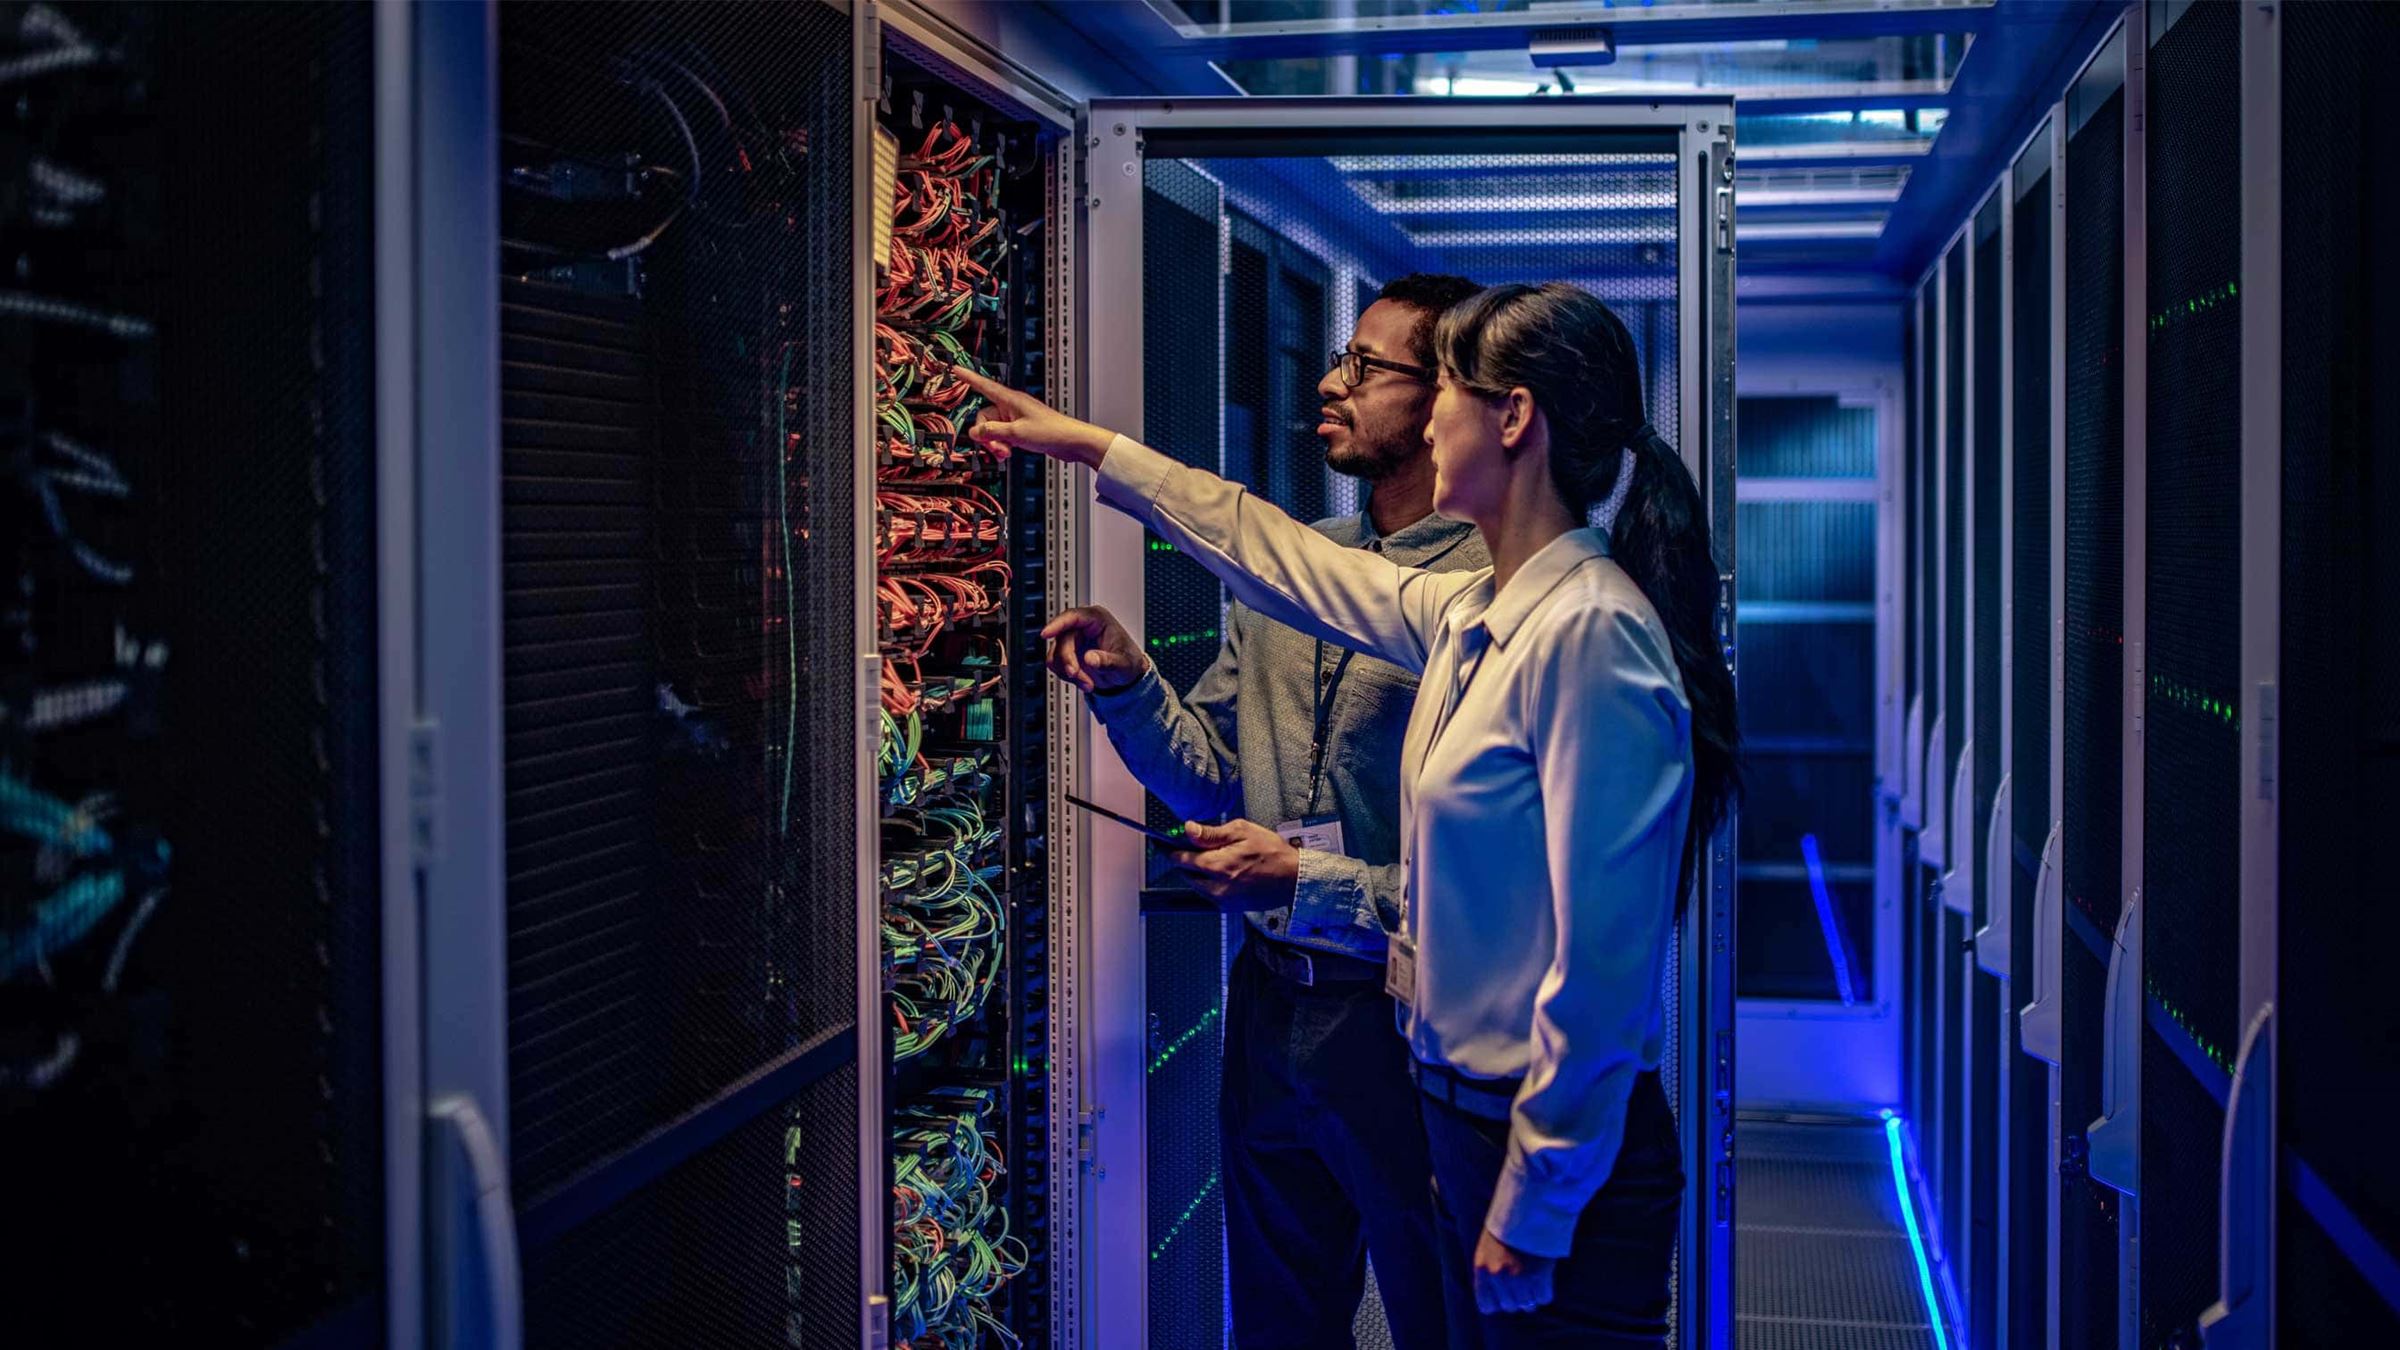 Two experts looking at racks in data centre